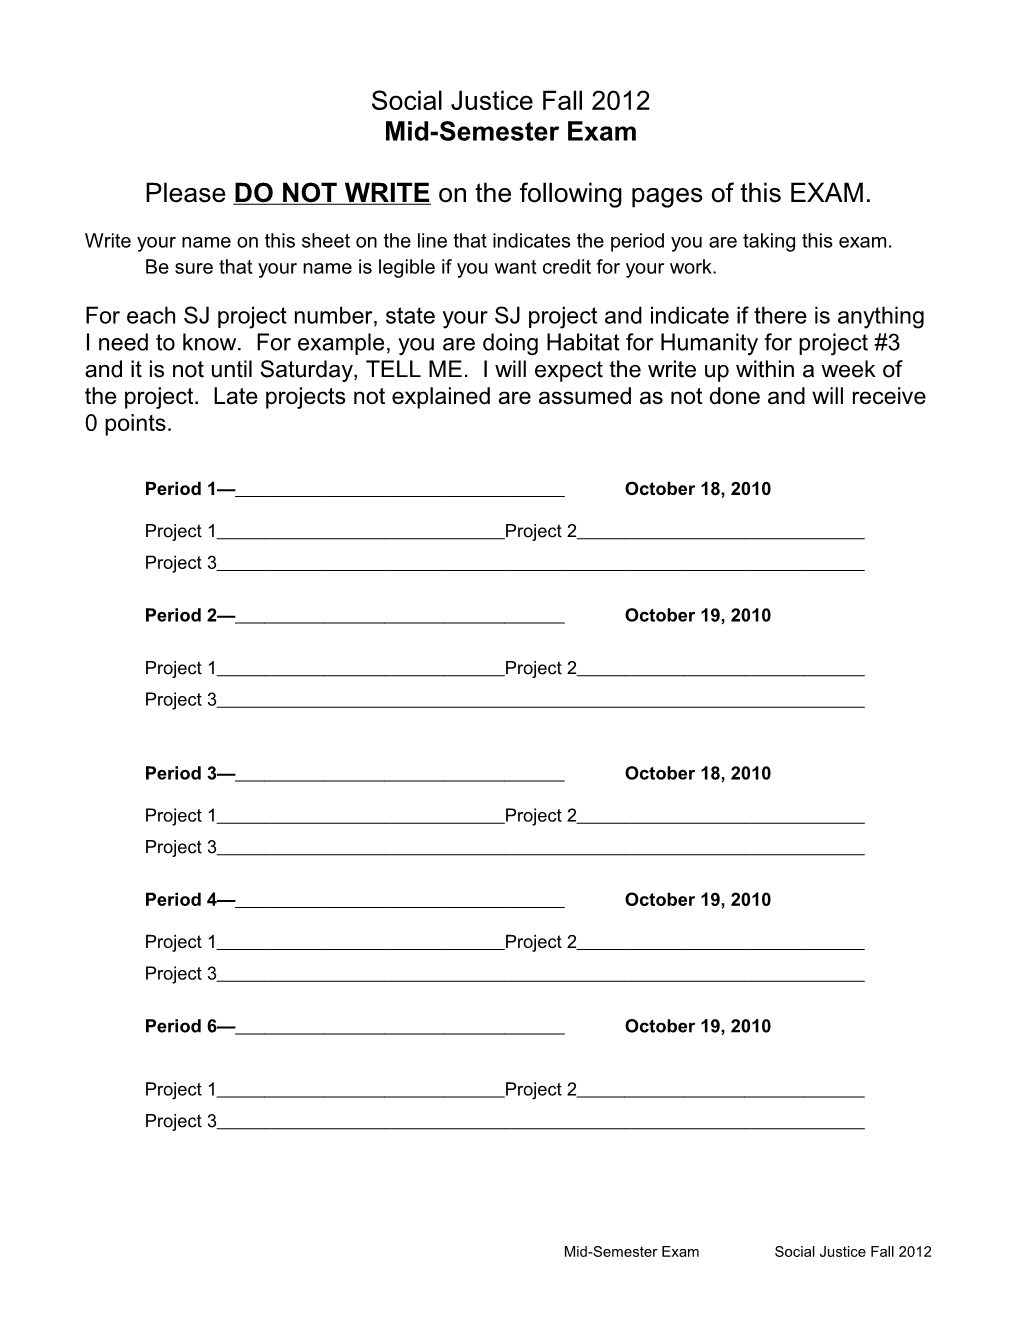 Please DO NOT WRITE on the Following Pages of This EXAM